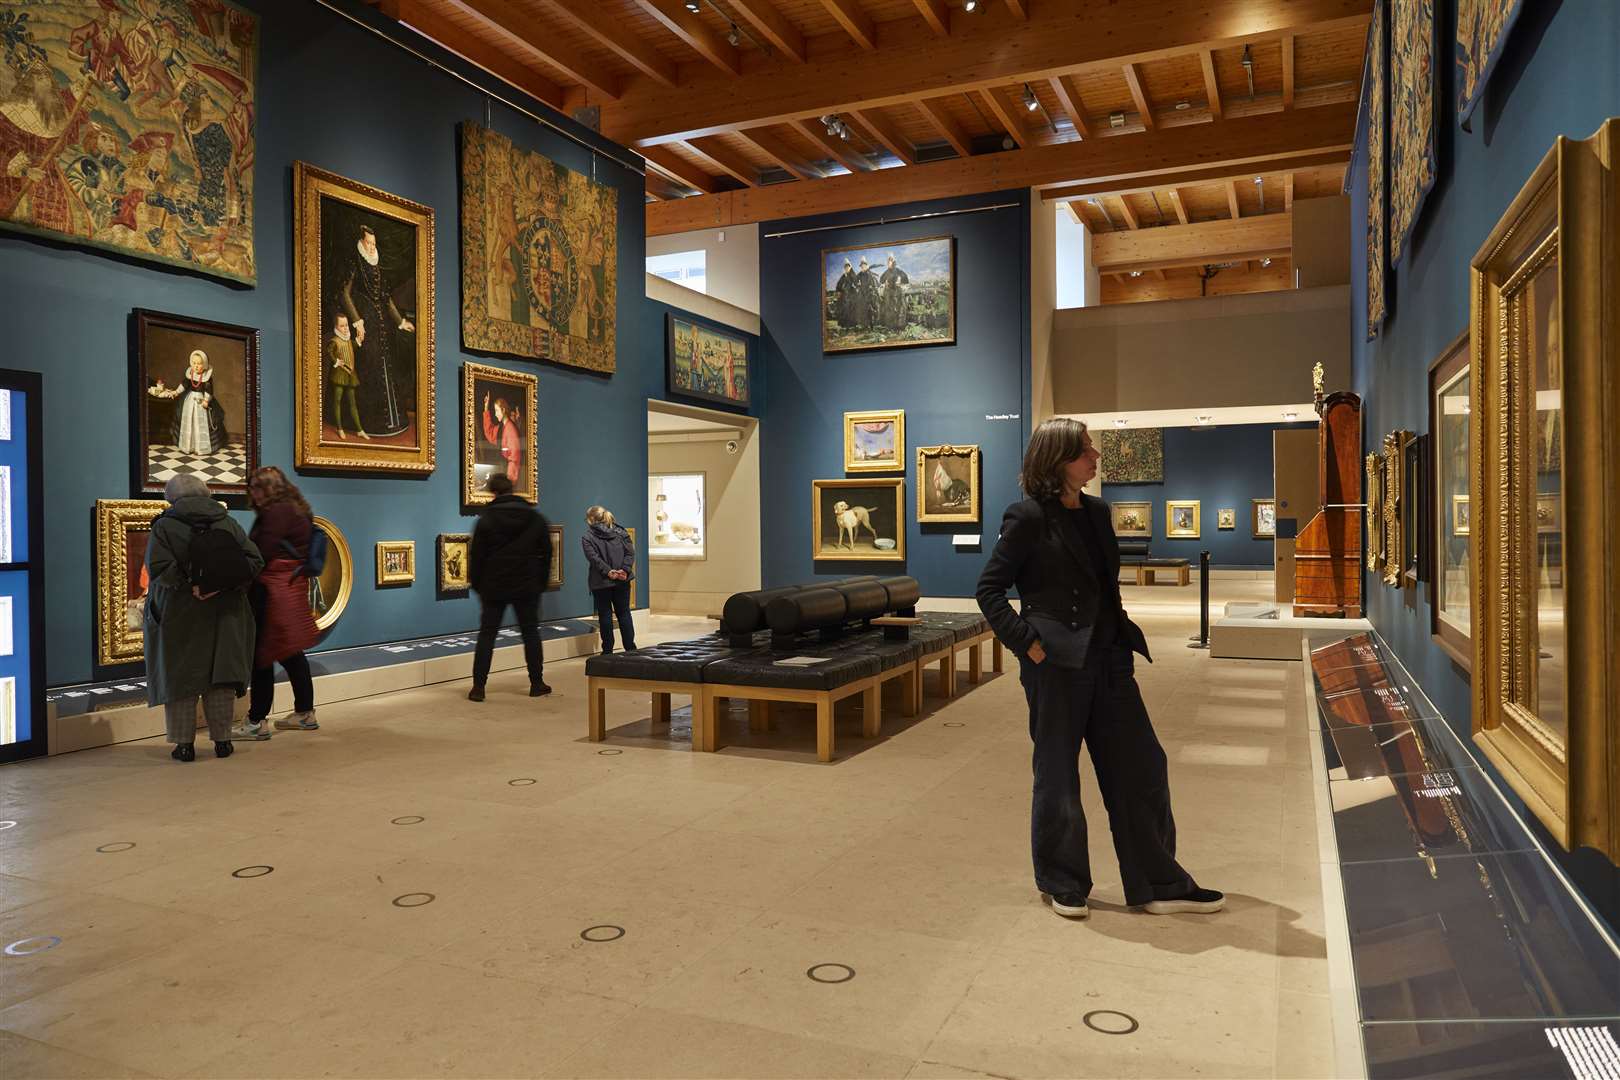 The Burrell Collection (Janie Airey/Art Fund/PA)